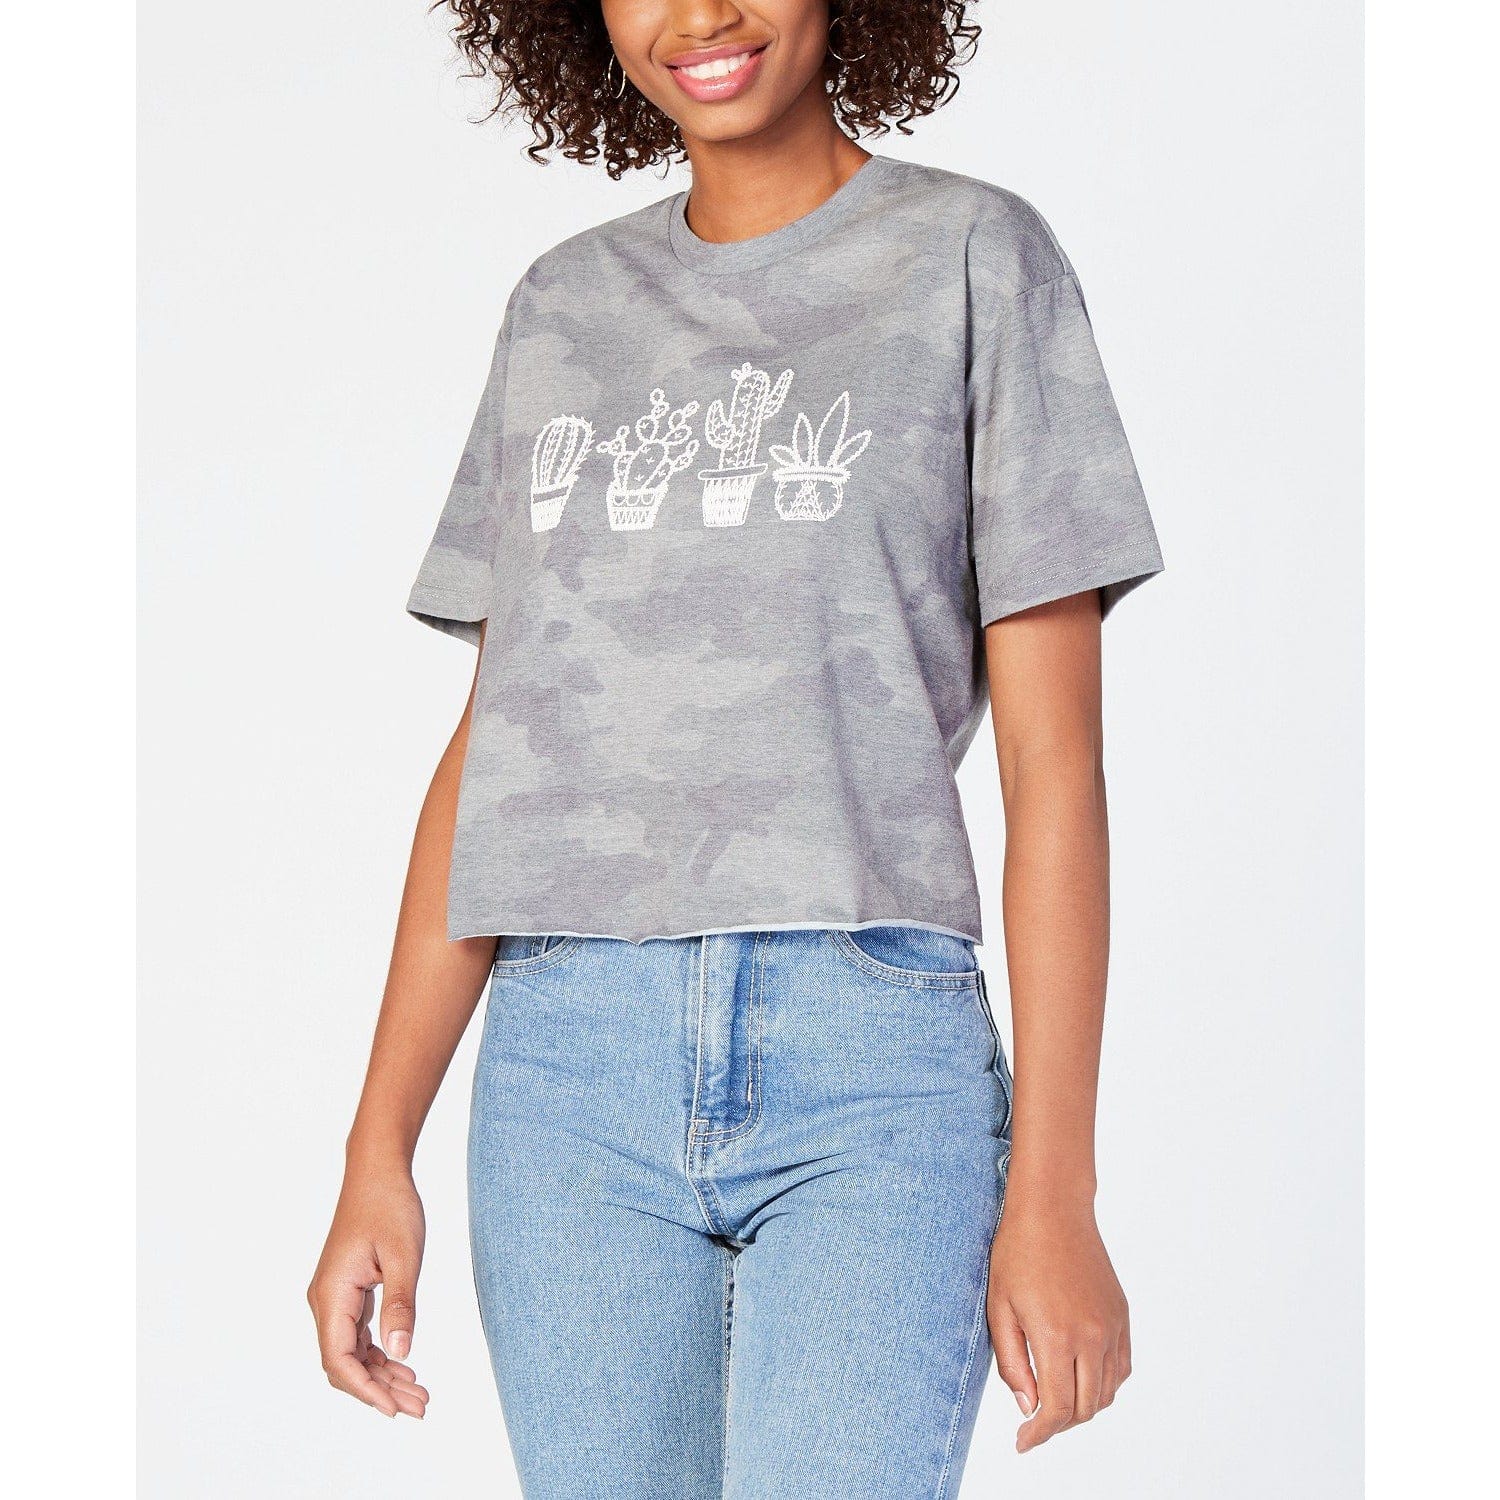 Rebellious One Juniors' Graphic T-Shirt - The Pink Pigs, A Compassionate Boutique